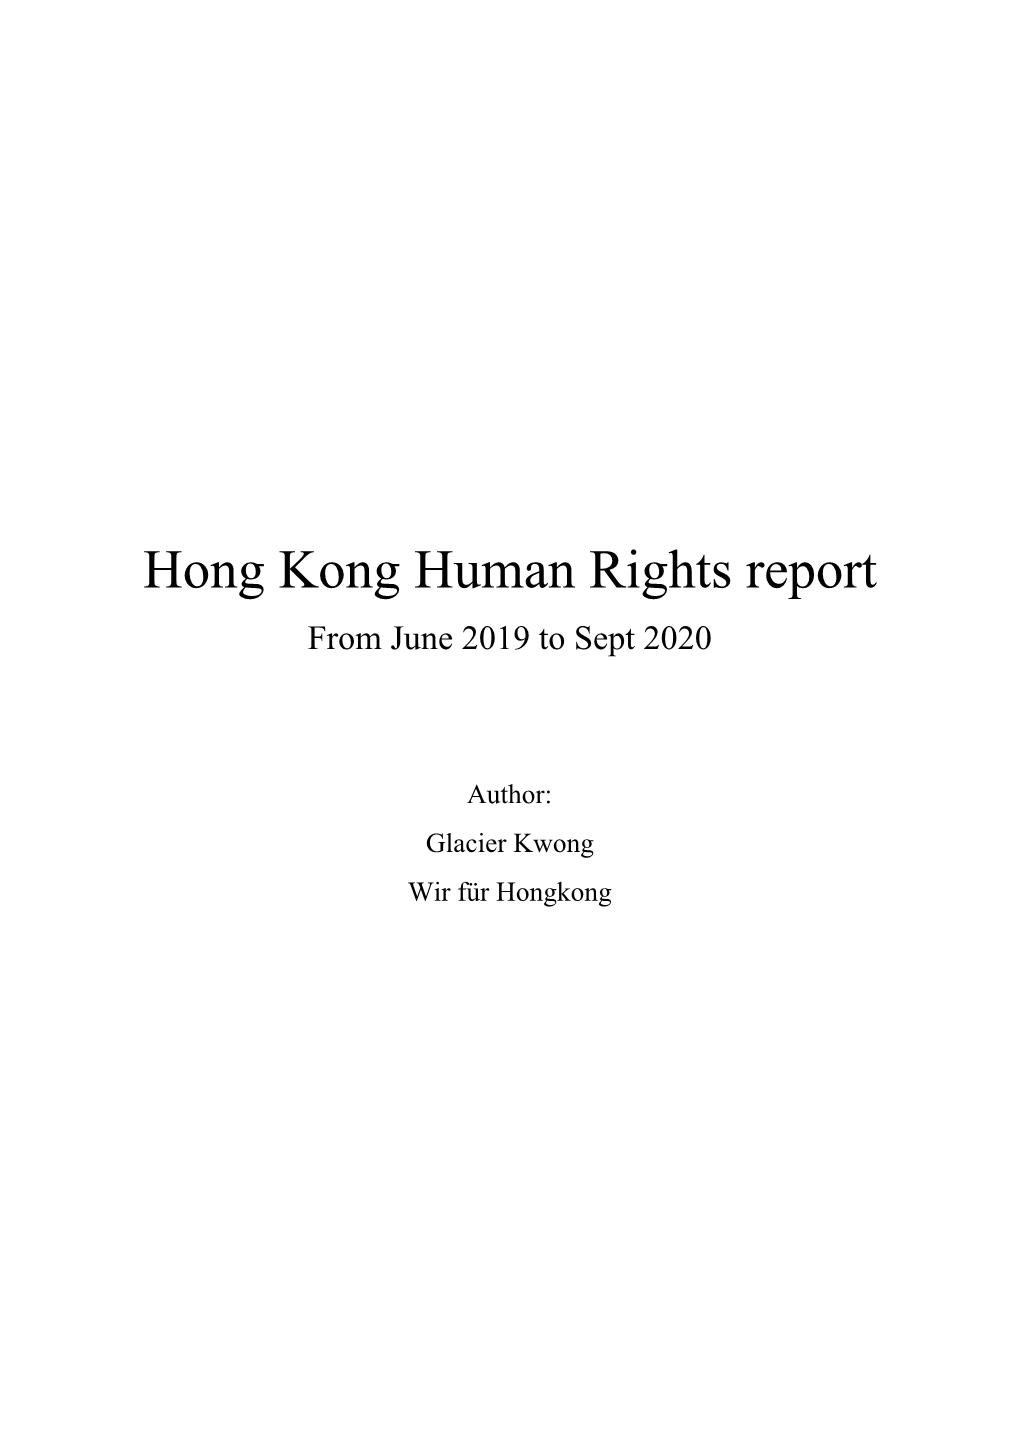 Hong Kong Human Rights Report from June 2019 to Sept 2020